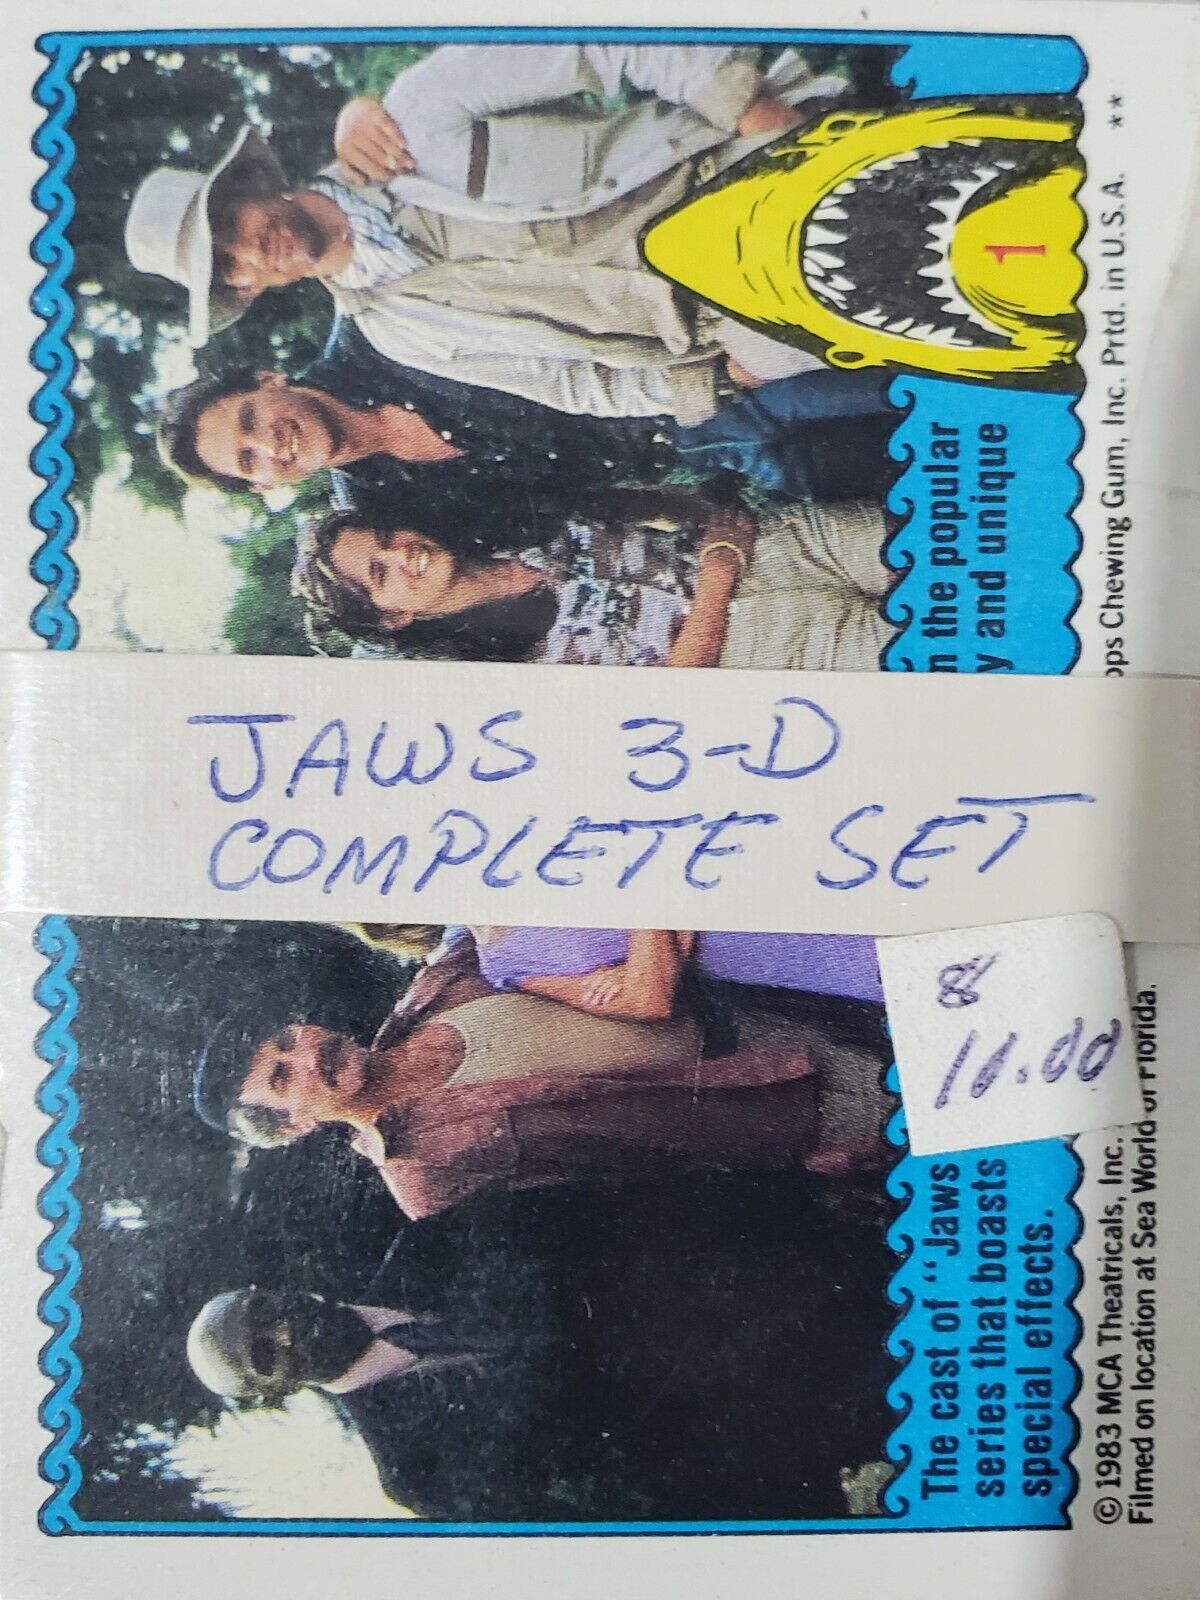 Jaws 3-D 1983 Complete Set of Trading Cards